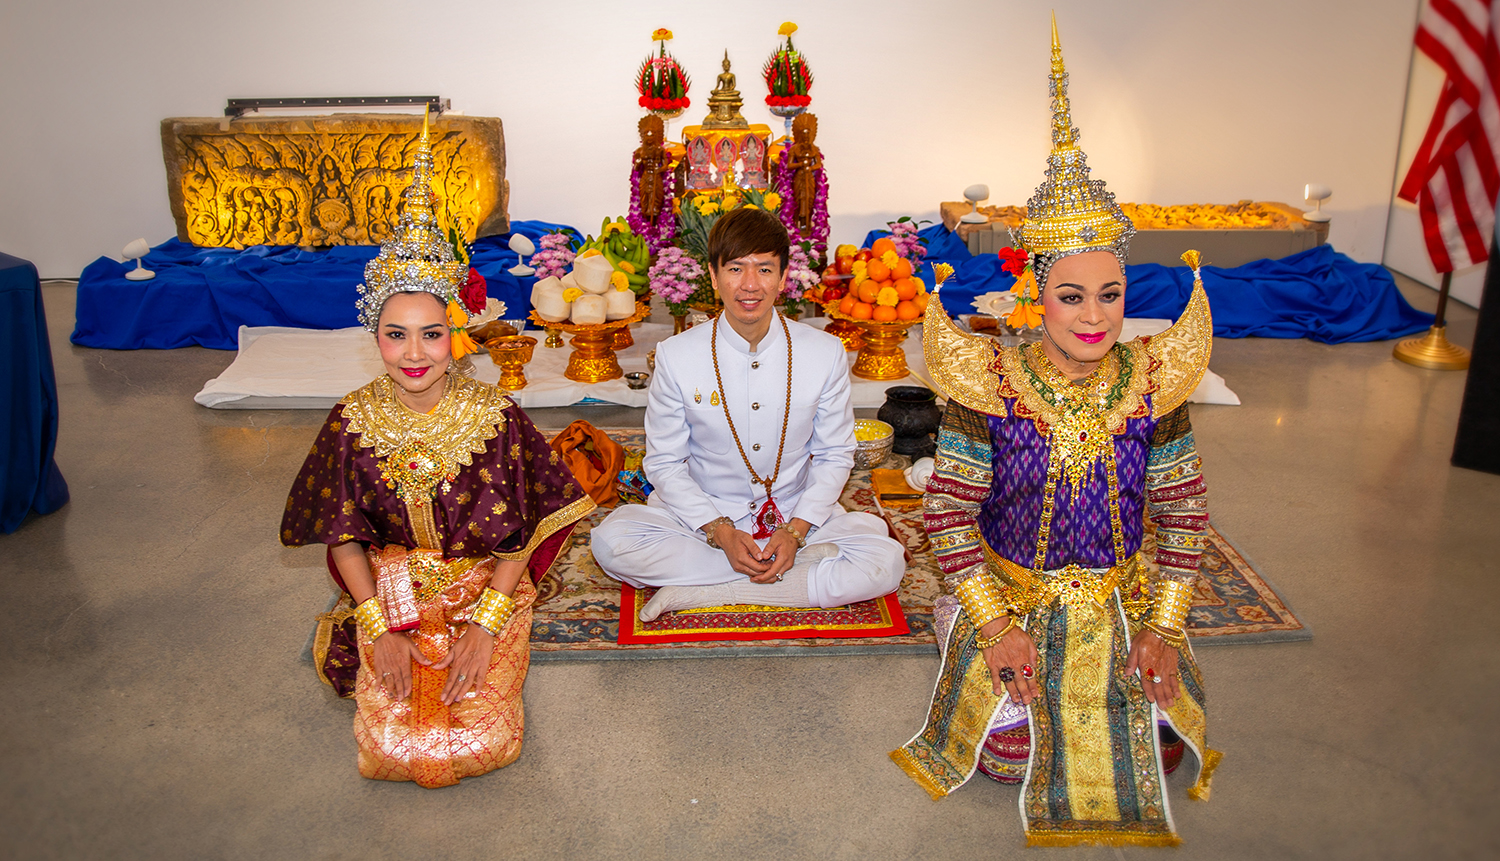 HSI returns stolen sacred artifacts to Thailand in commemoration ceremony